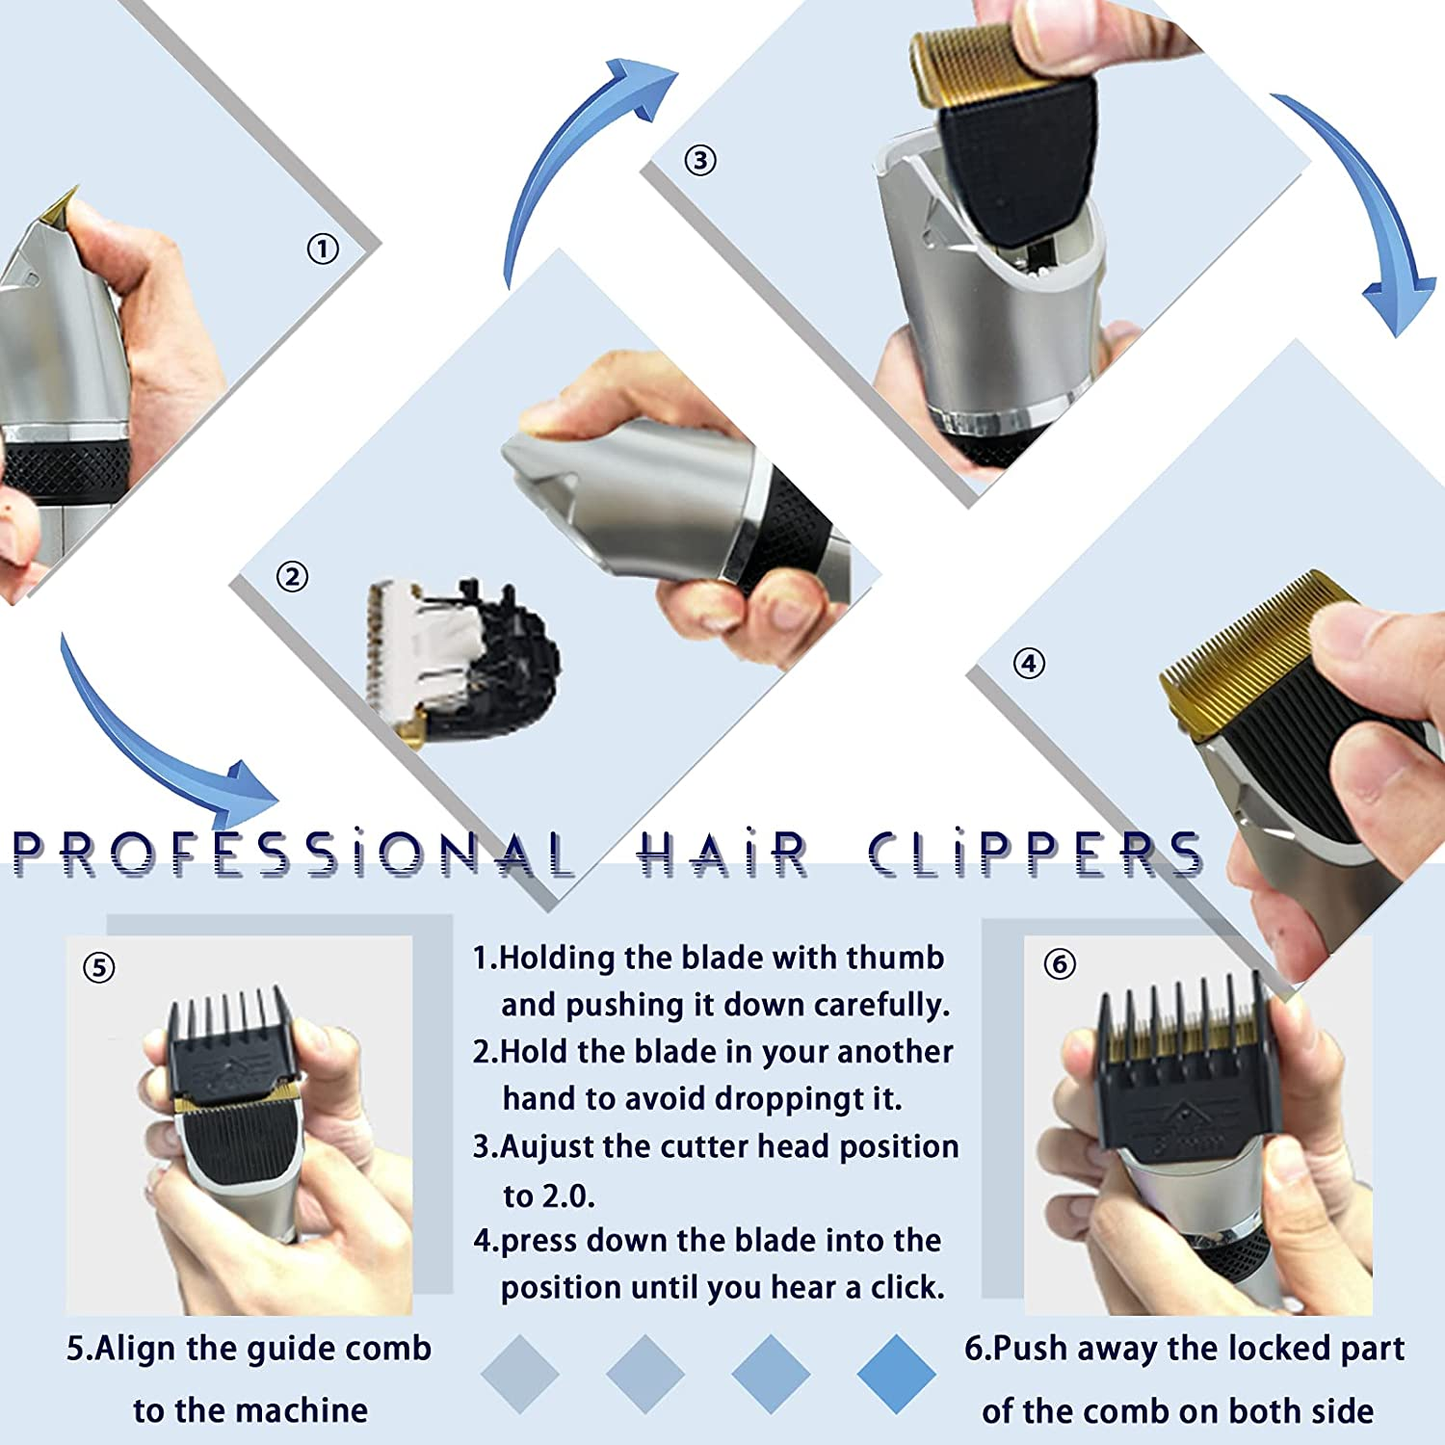 Hair Clippers - Professional Hair Clippers for Men, Hair Trimmer for Men, Hair Cutting Kit, Cordless Hair Clippers, Electric Trimmer Barbers with LED Display.